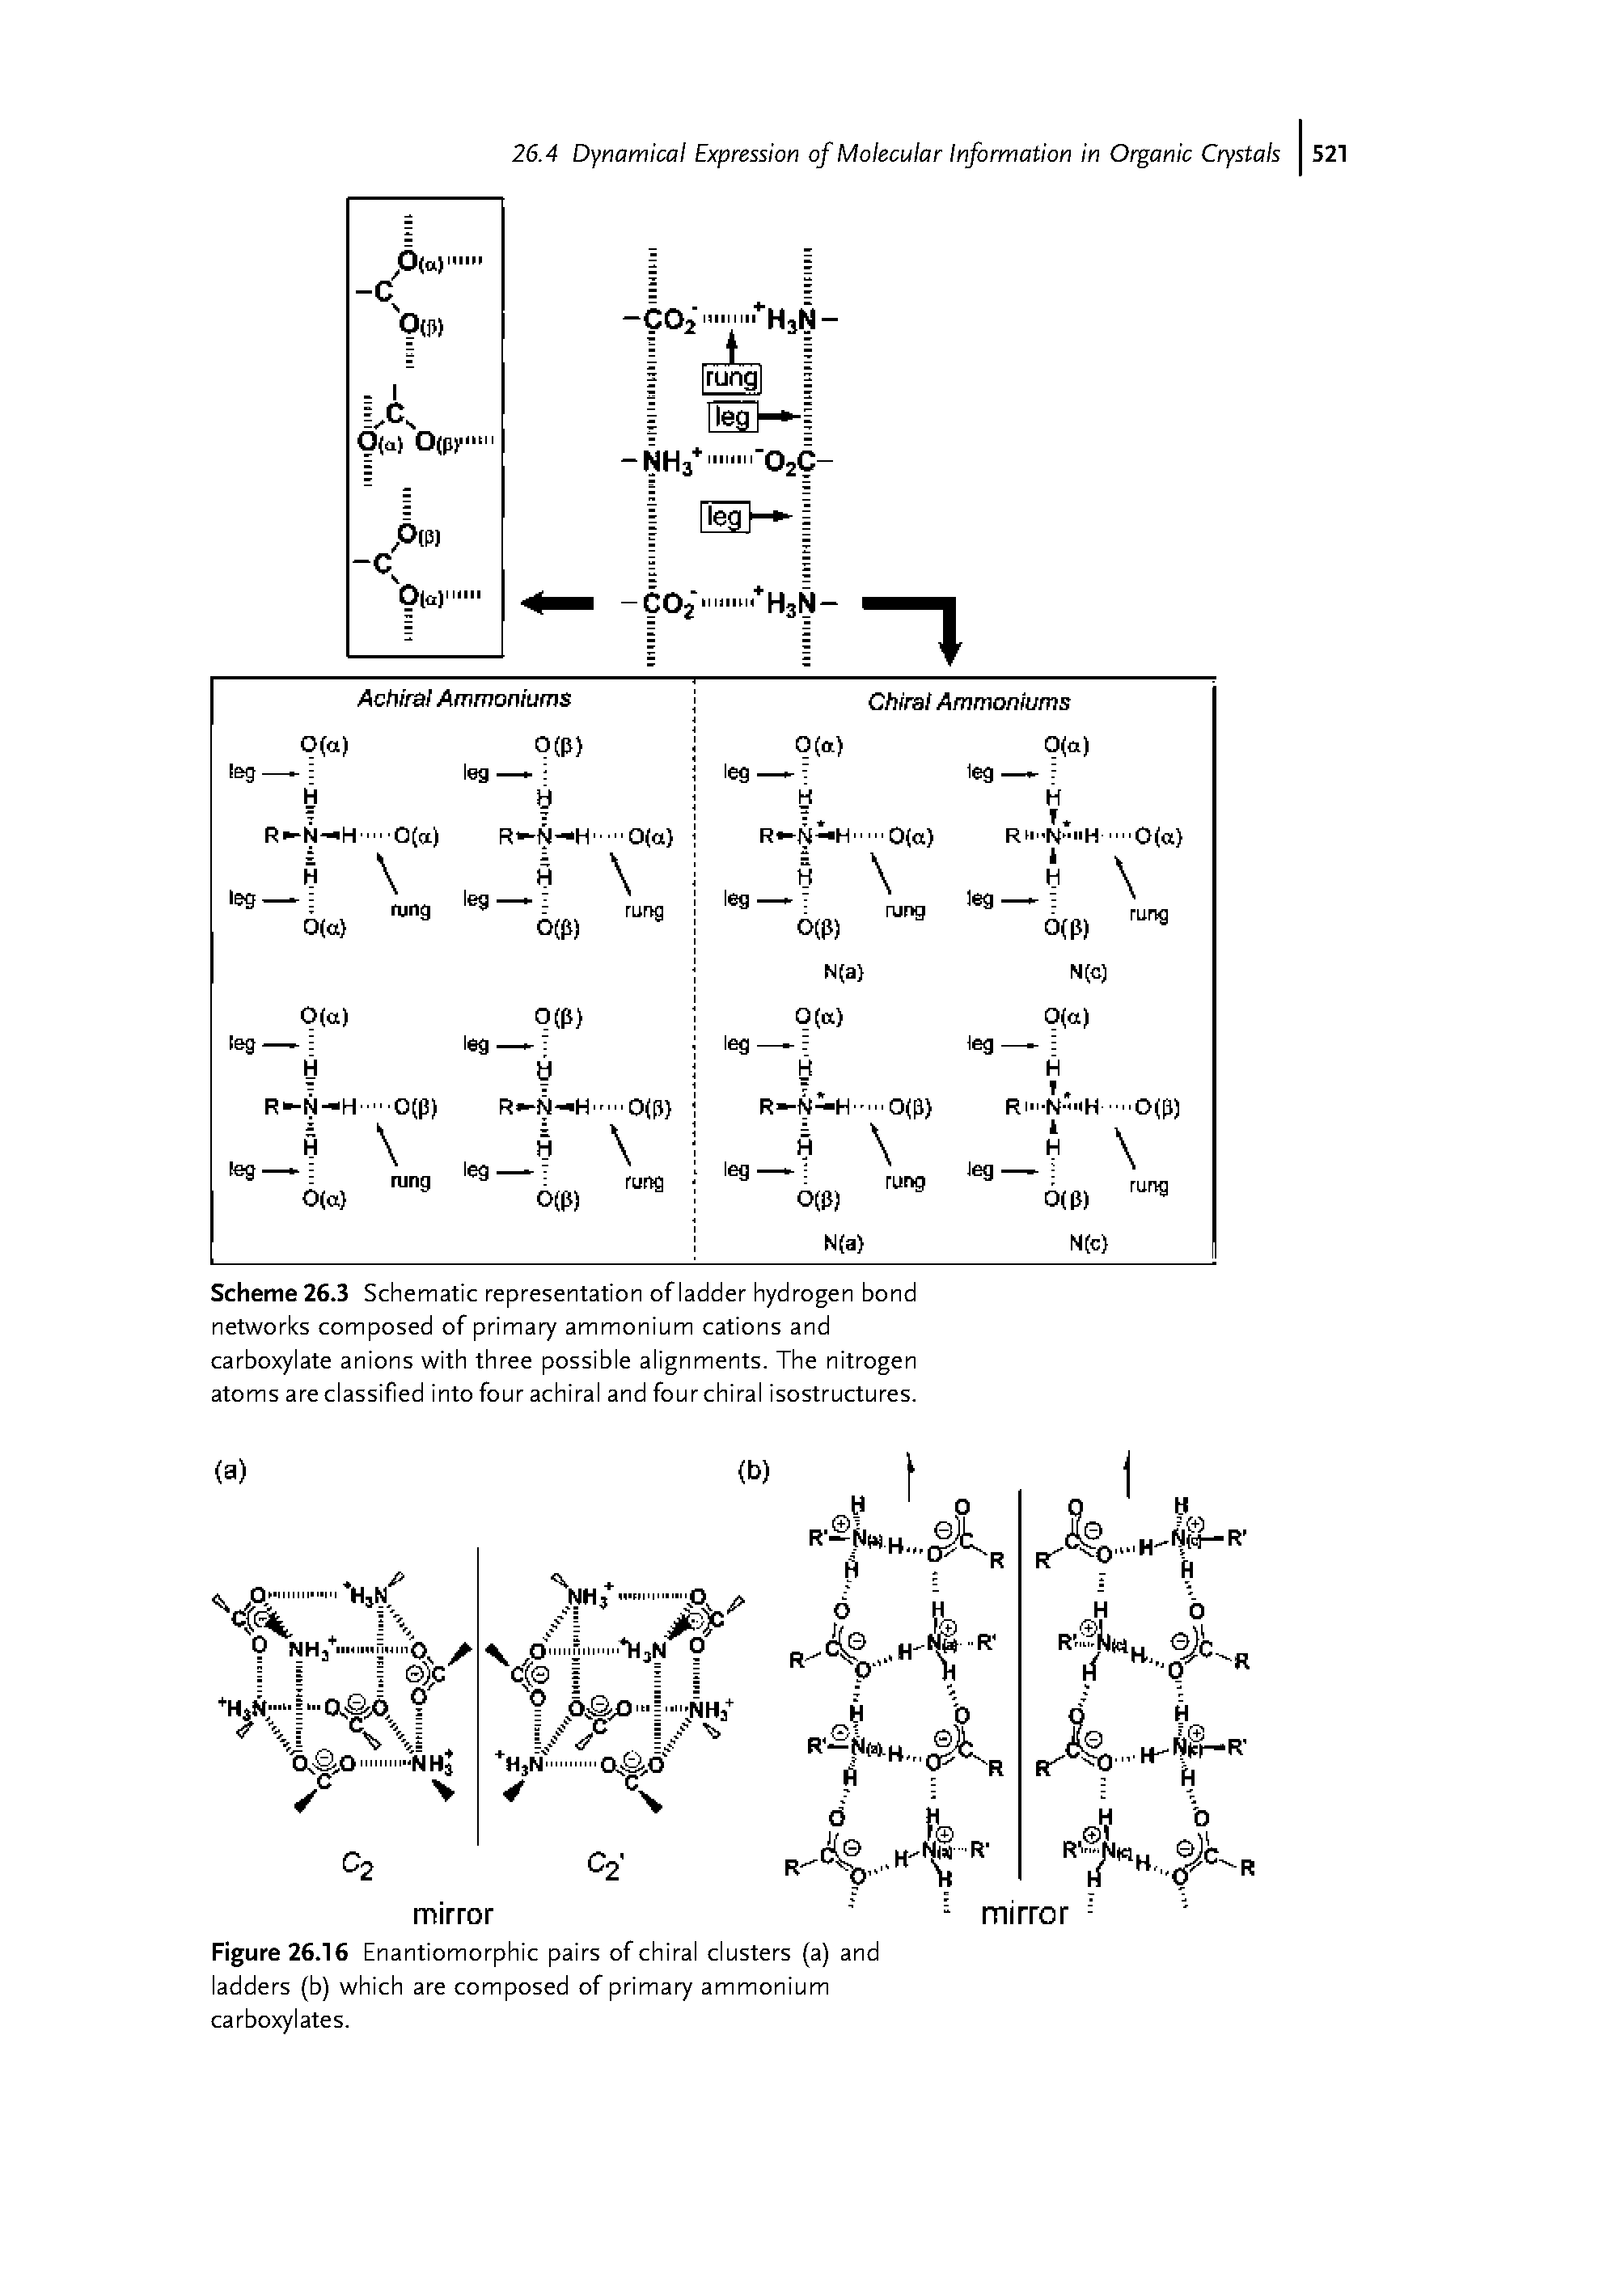 Figure 26.16 Enantiomorphic pairs of chiral clusters (a) and ladders (b) which are composed of primary ammonium carboxylates.